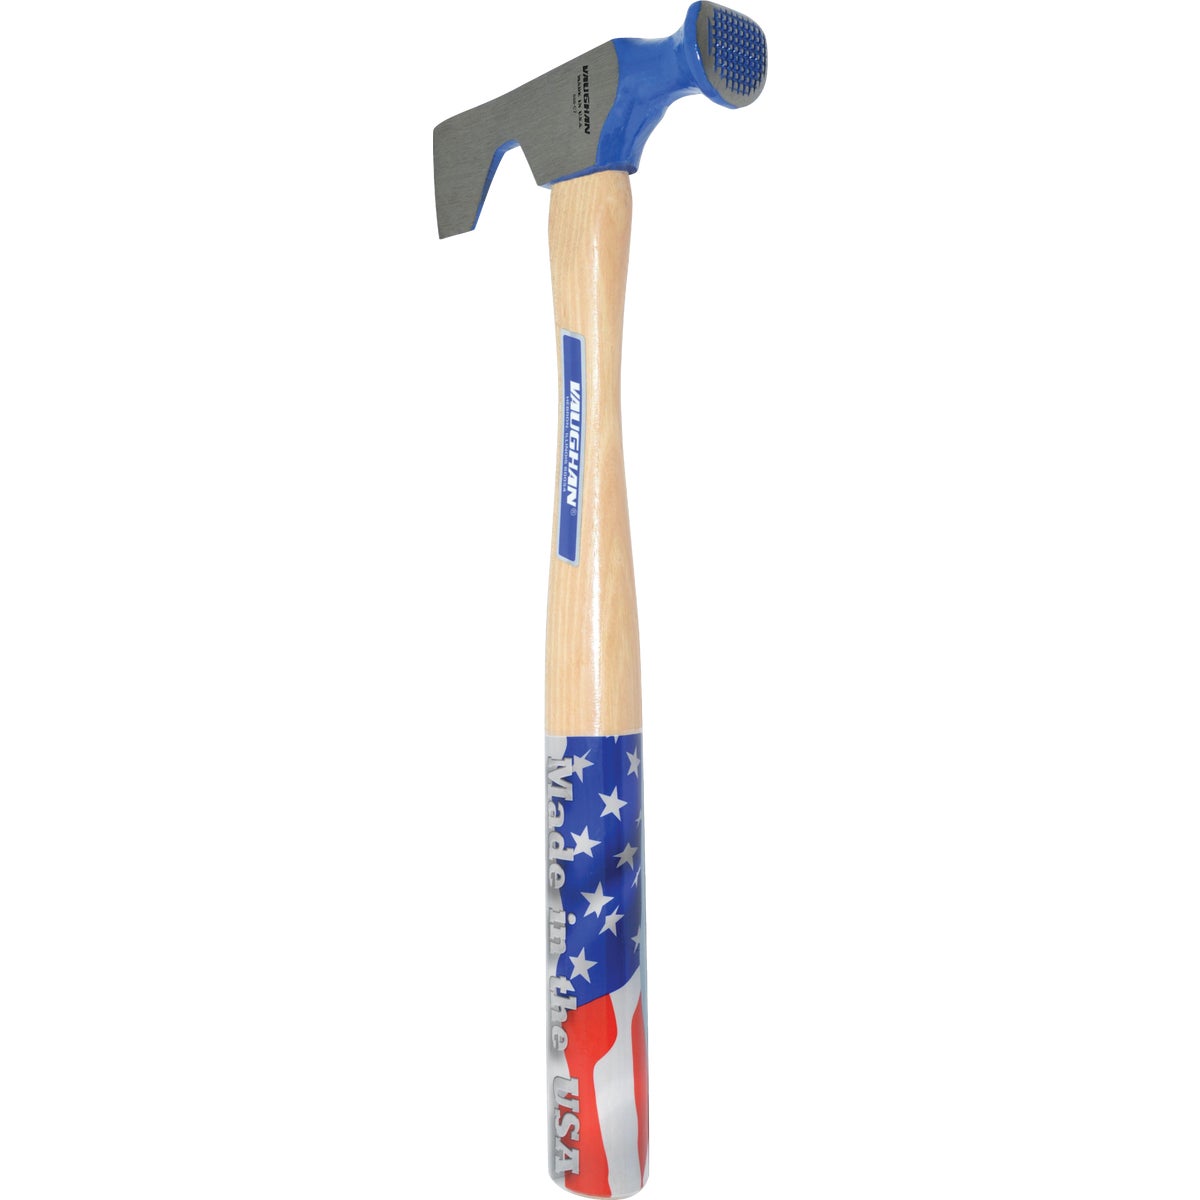 Vaughan 12 Oz. Steel Drywall Hammer with 13-1/2 In. Hickory Handle